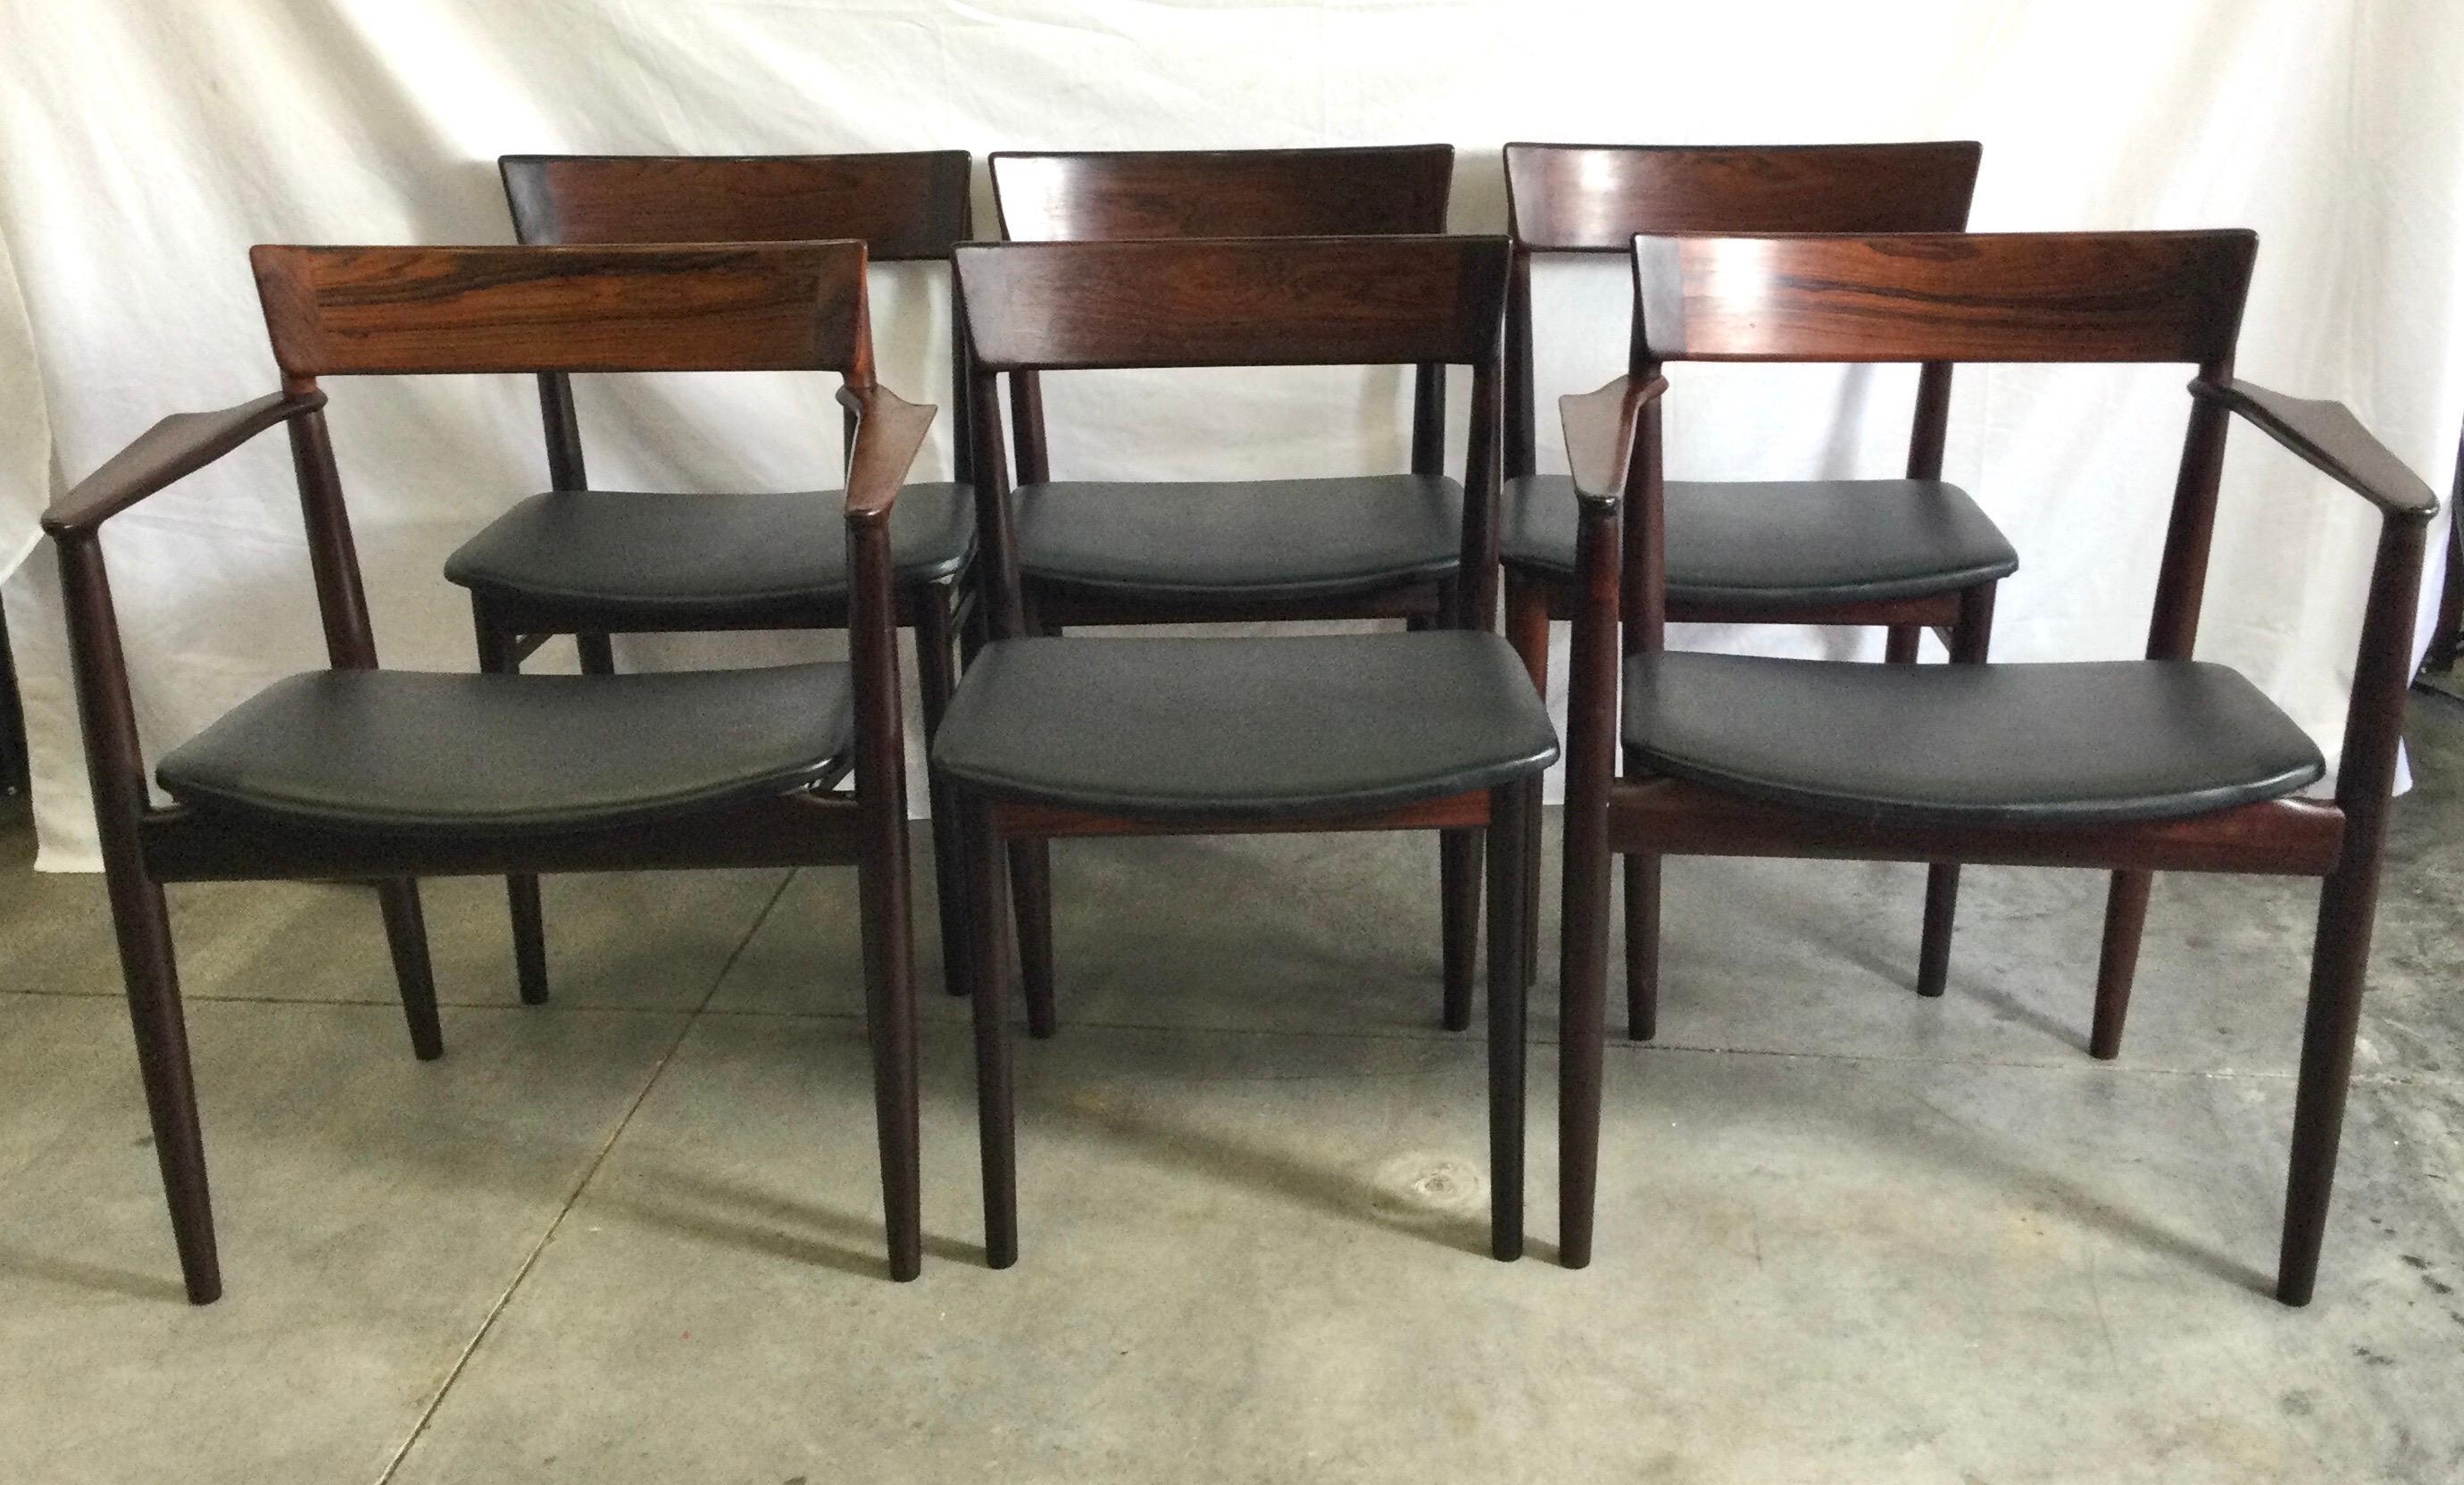 Rare set of 6 dining chairs designed by Henry Rosengren Hansen by Brande Modelfabeik. These chairs are made from the finest Brazilian rosewood and the level of craftmanship is just superb. The attention to detail of the rosewood arms and legs is